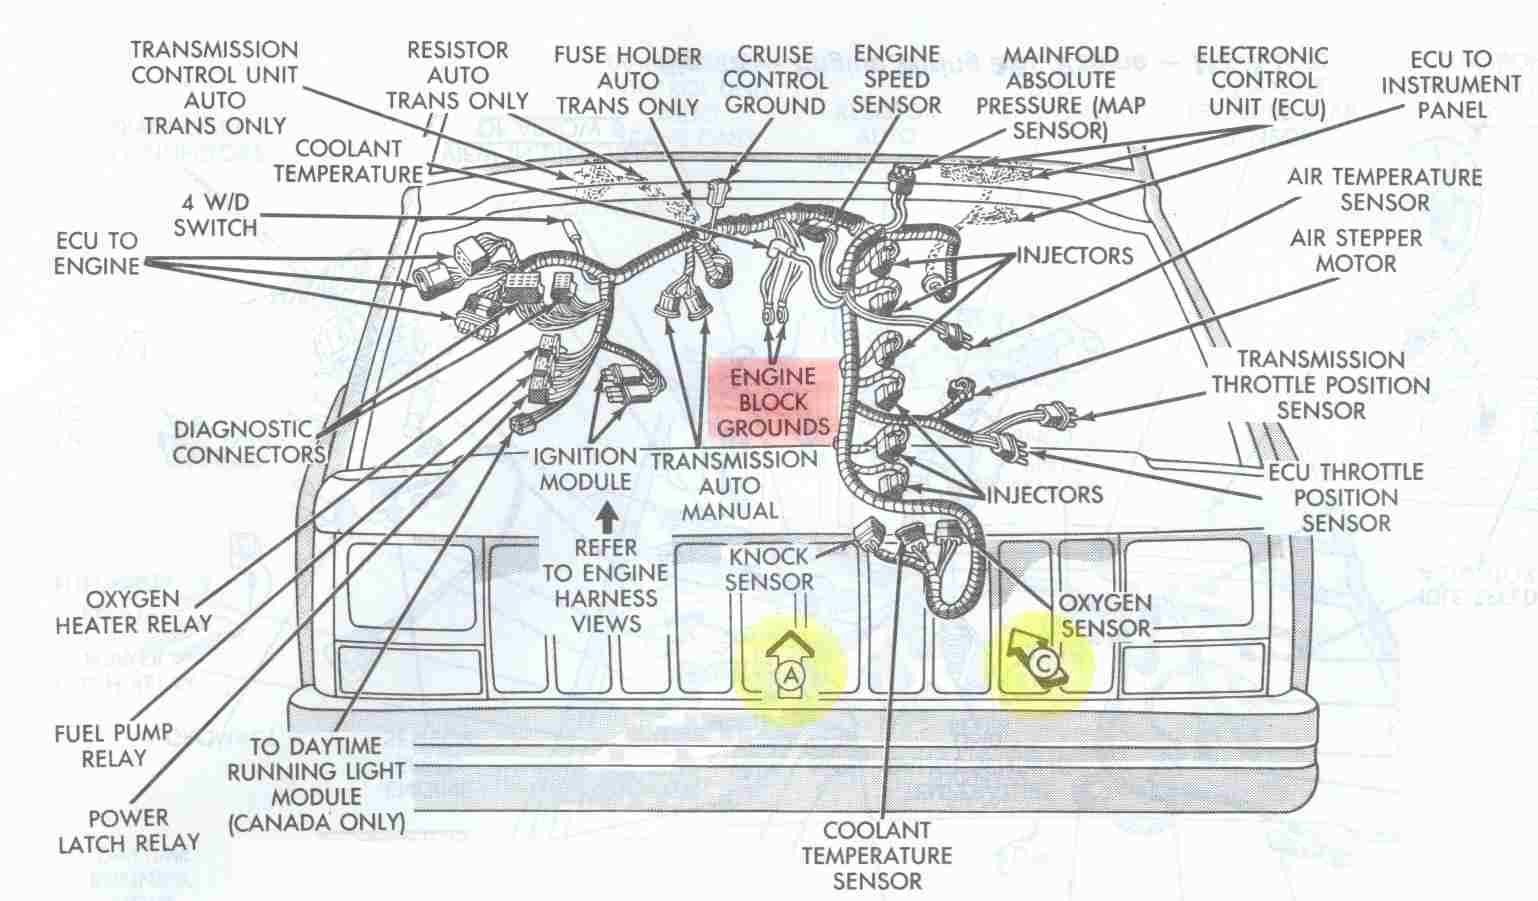 Engine Bay schematic showing major electrical ground points for 4 0L Jeep Cherokee engines